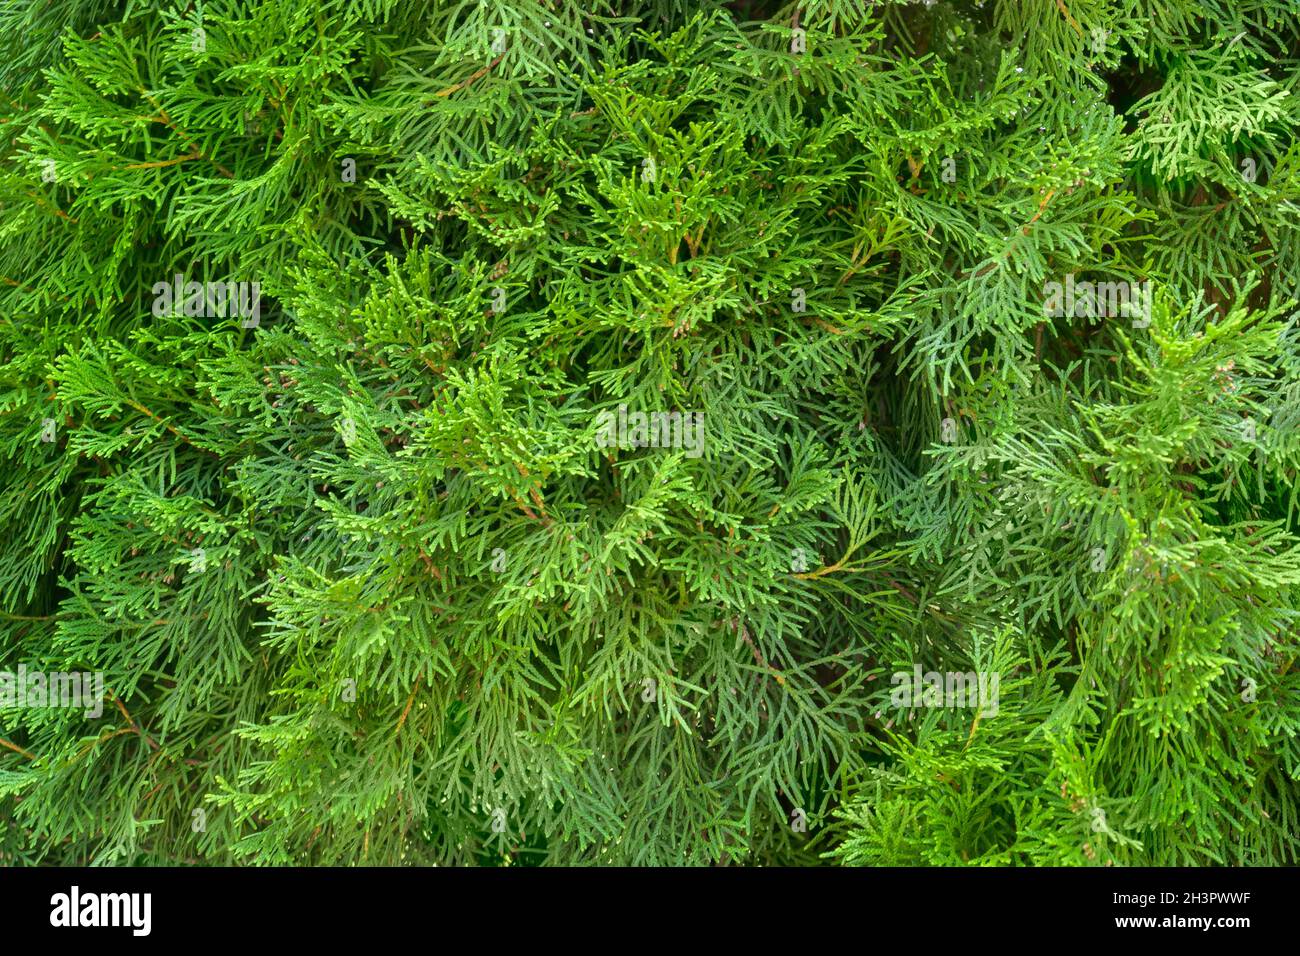 Green thuja tree background. Platycladus orientalis is an evergreen coniferous plant. Close-up image. Stock Photo